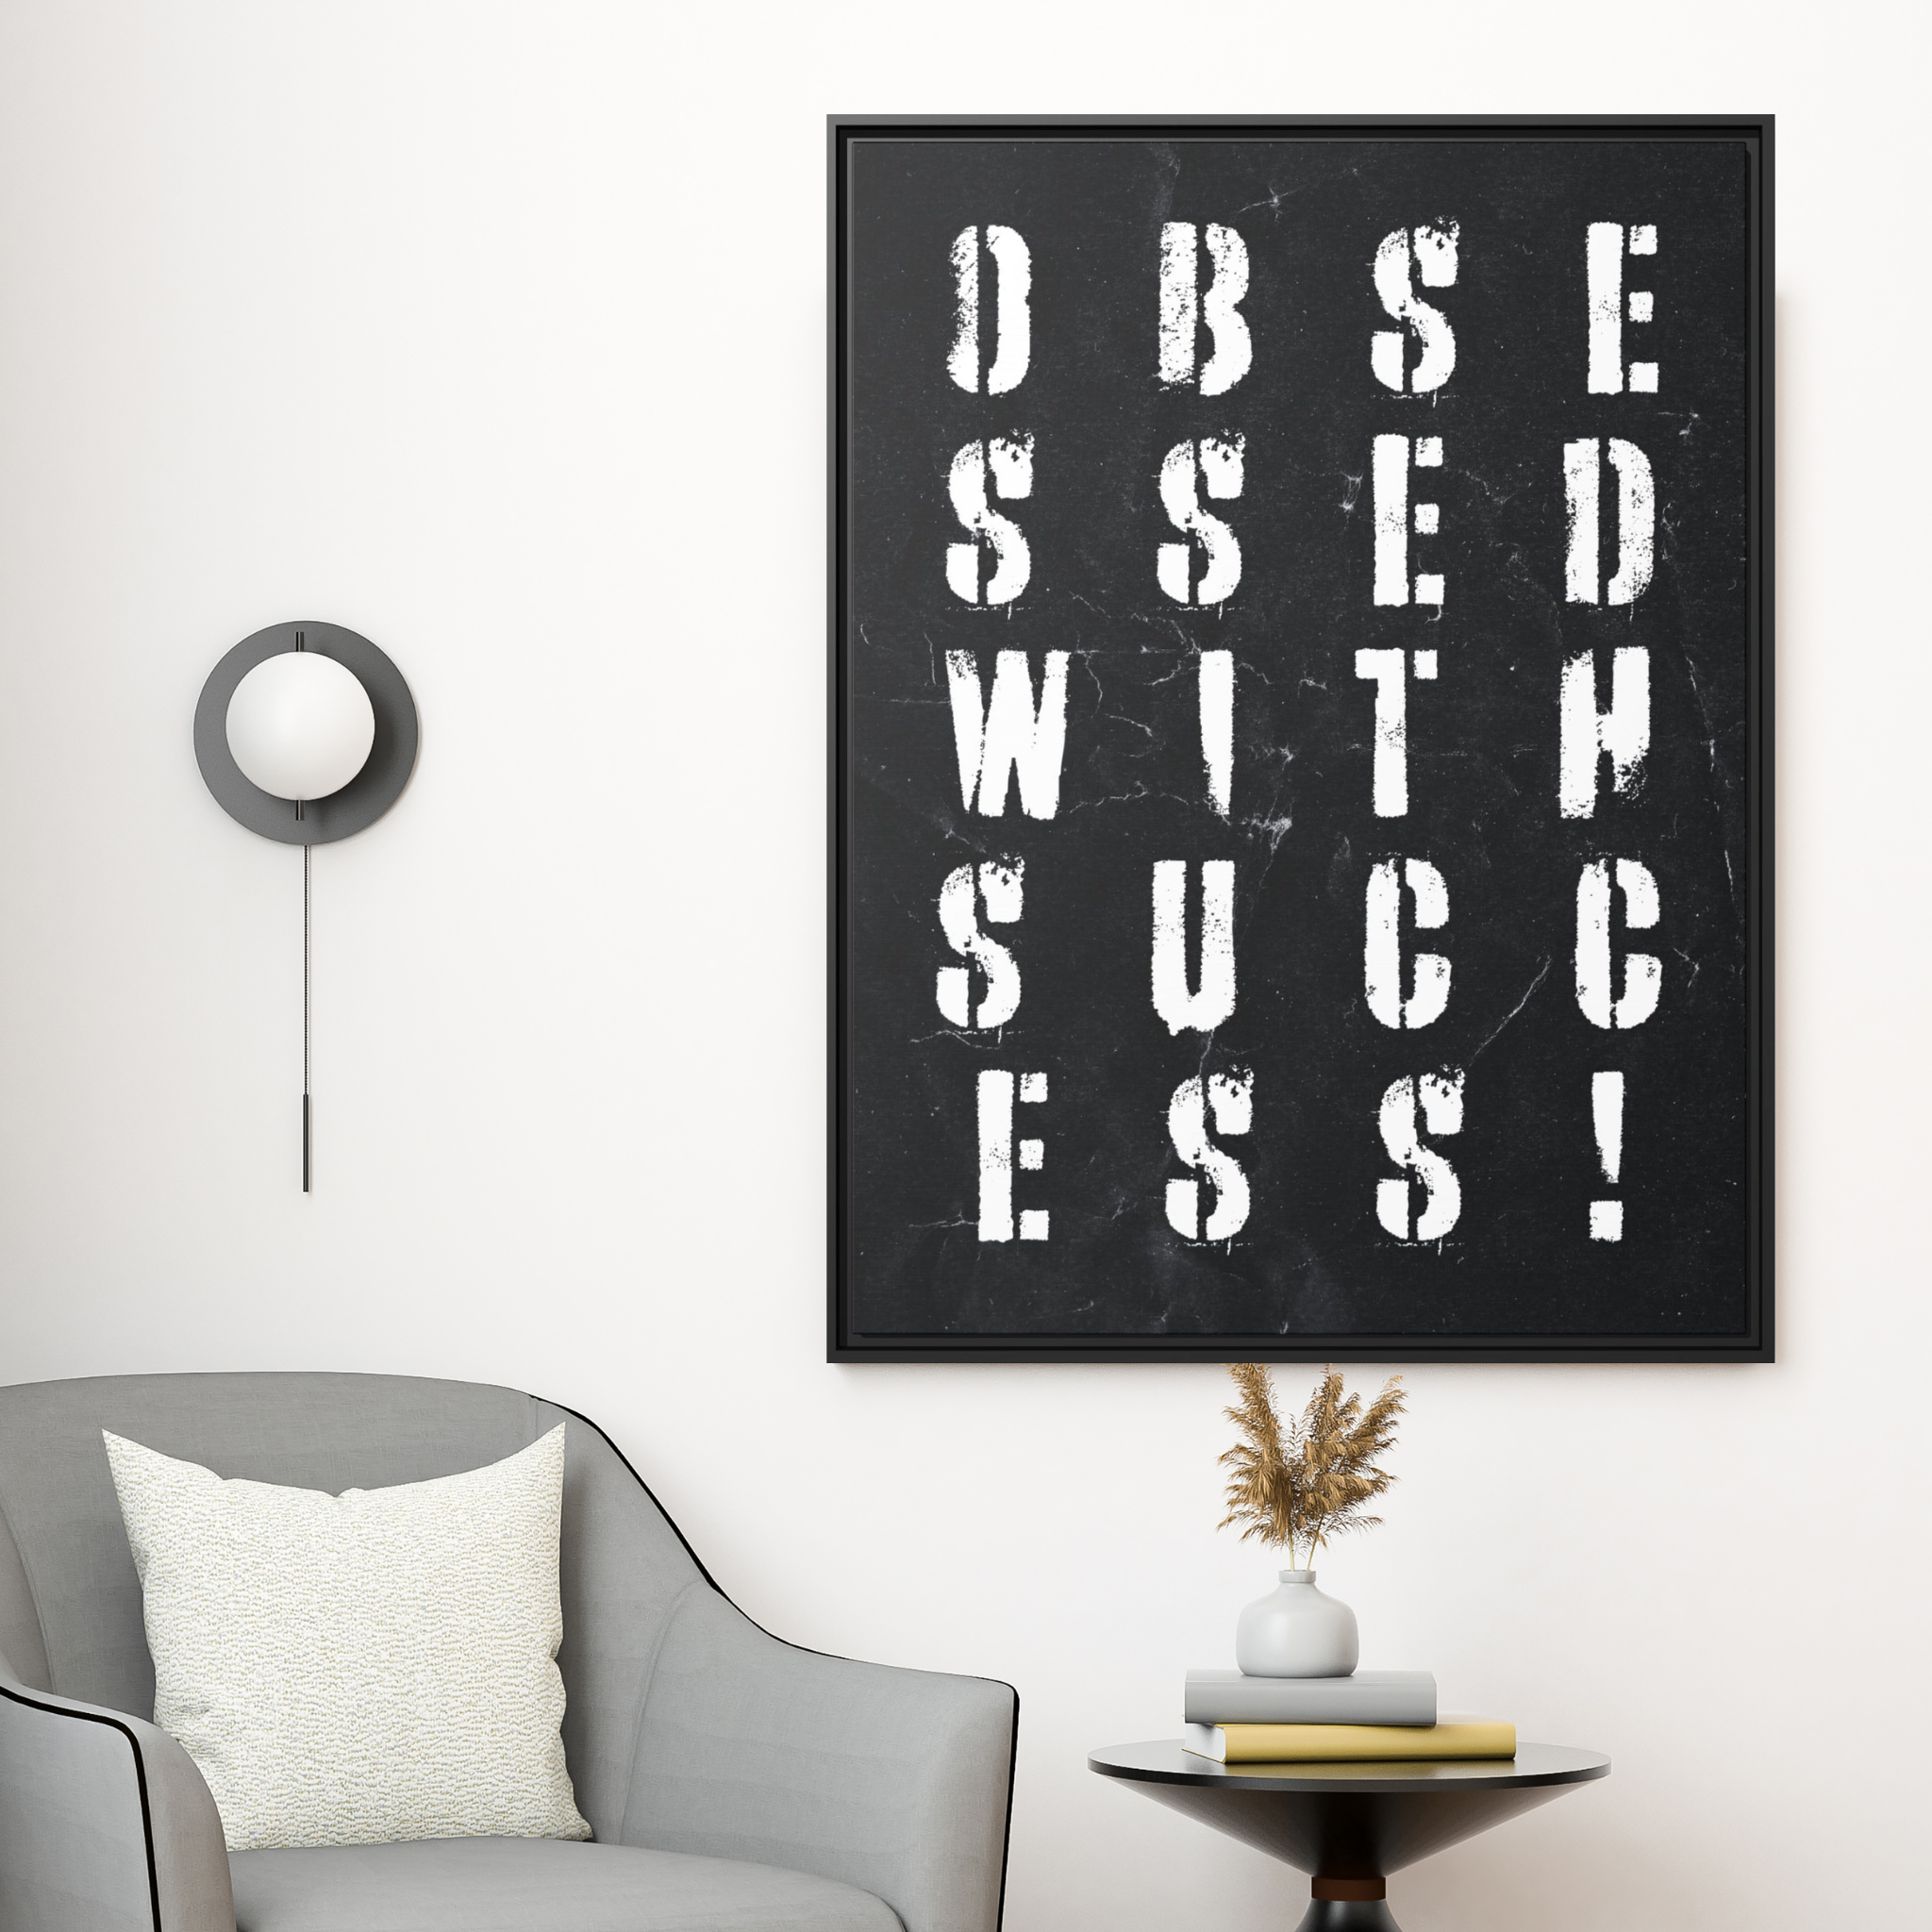 Obsessed With Success - Grid - Wall Art additional image 1